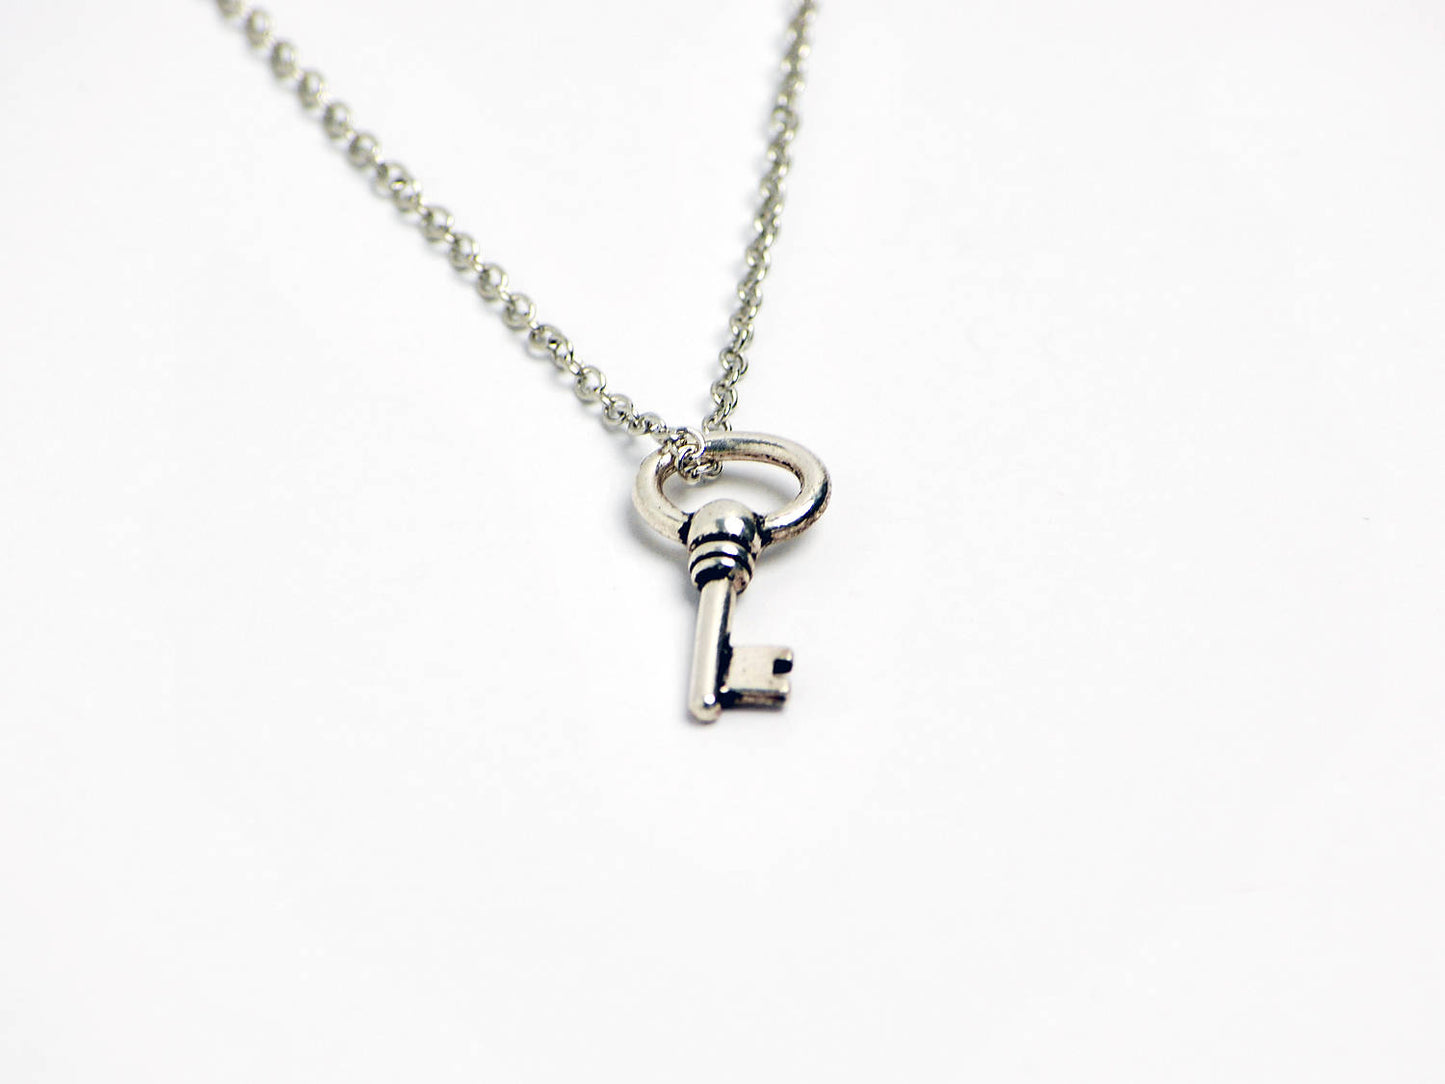 Oval Key Necklace in Silver